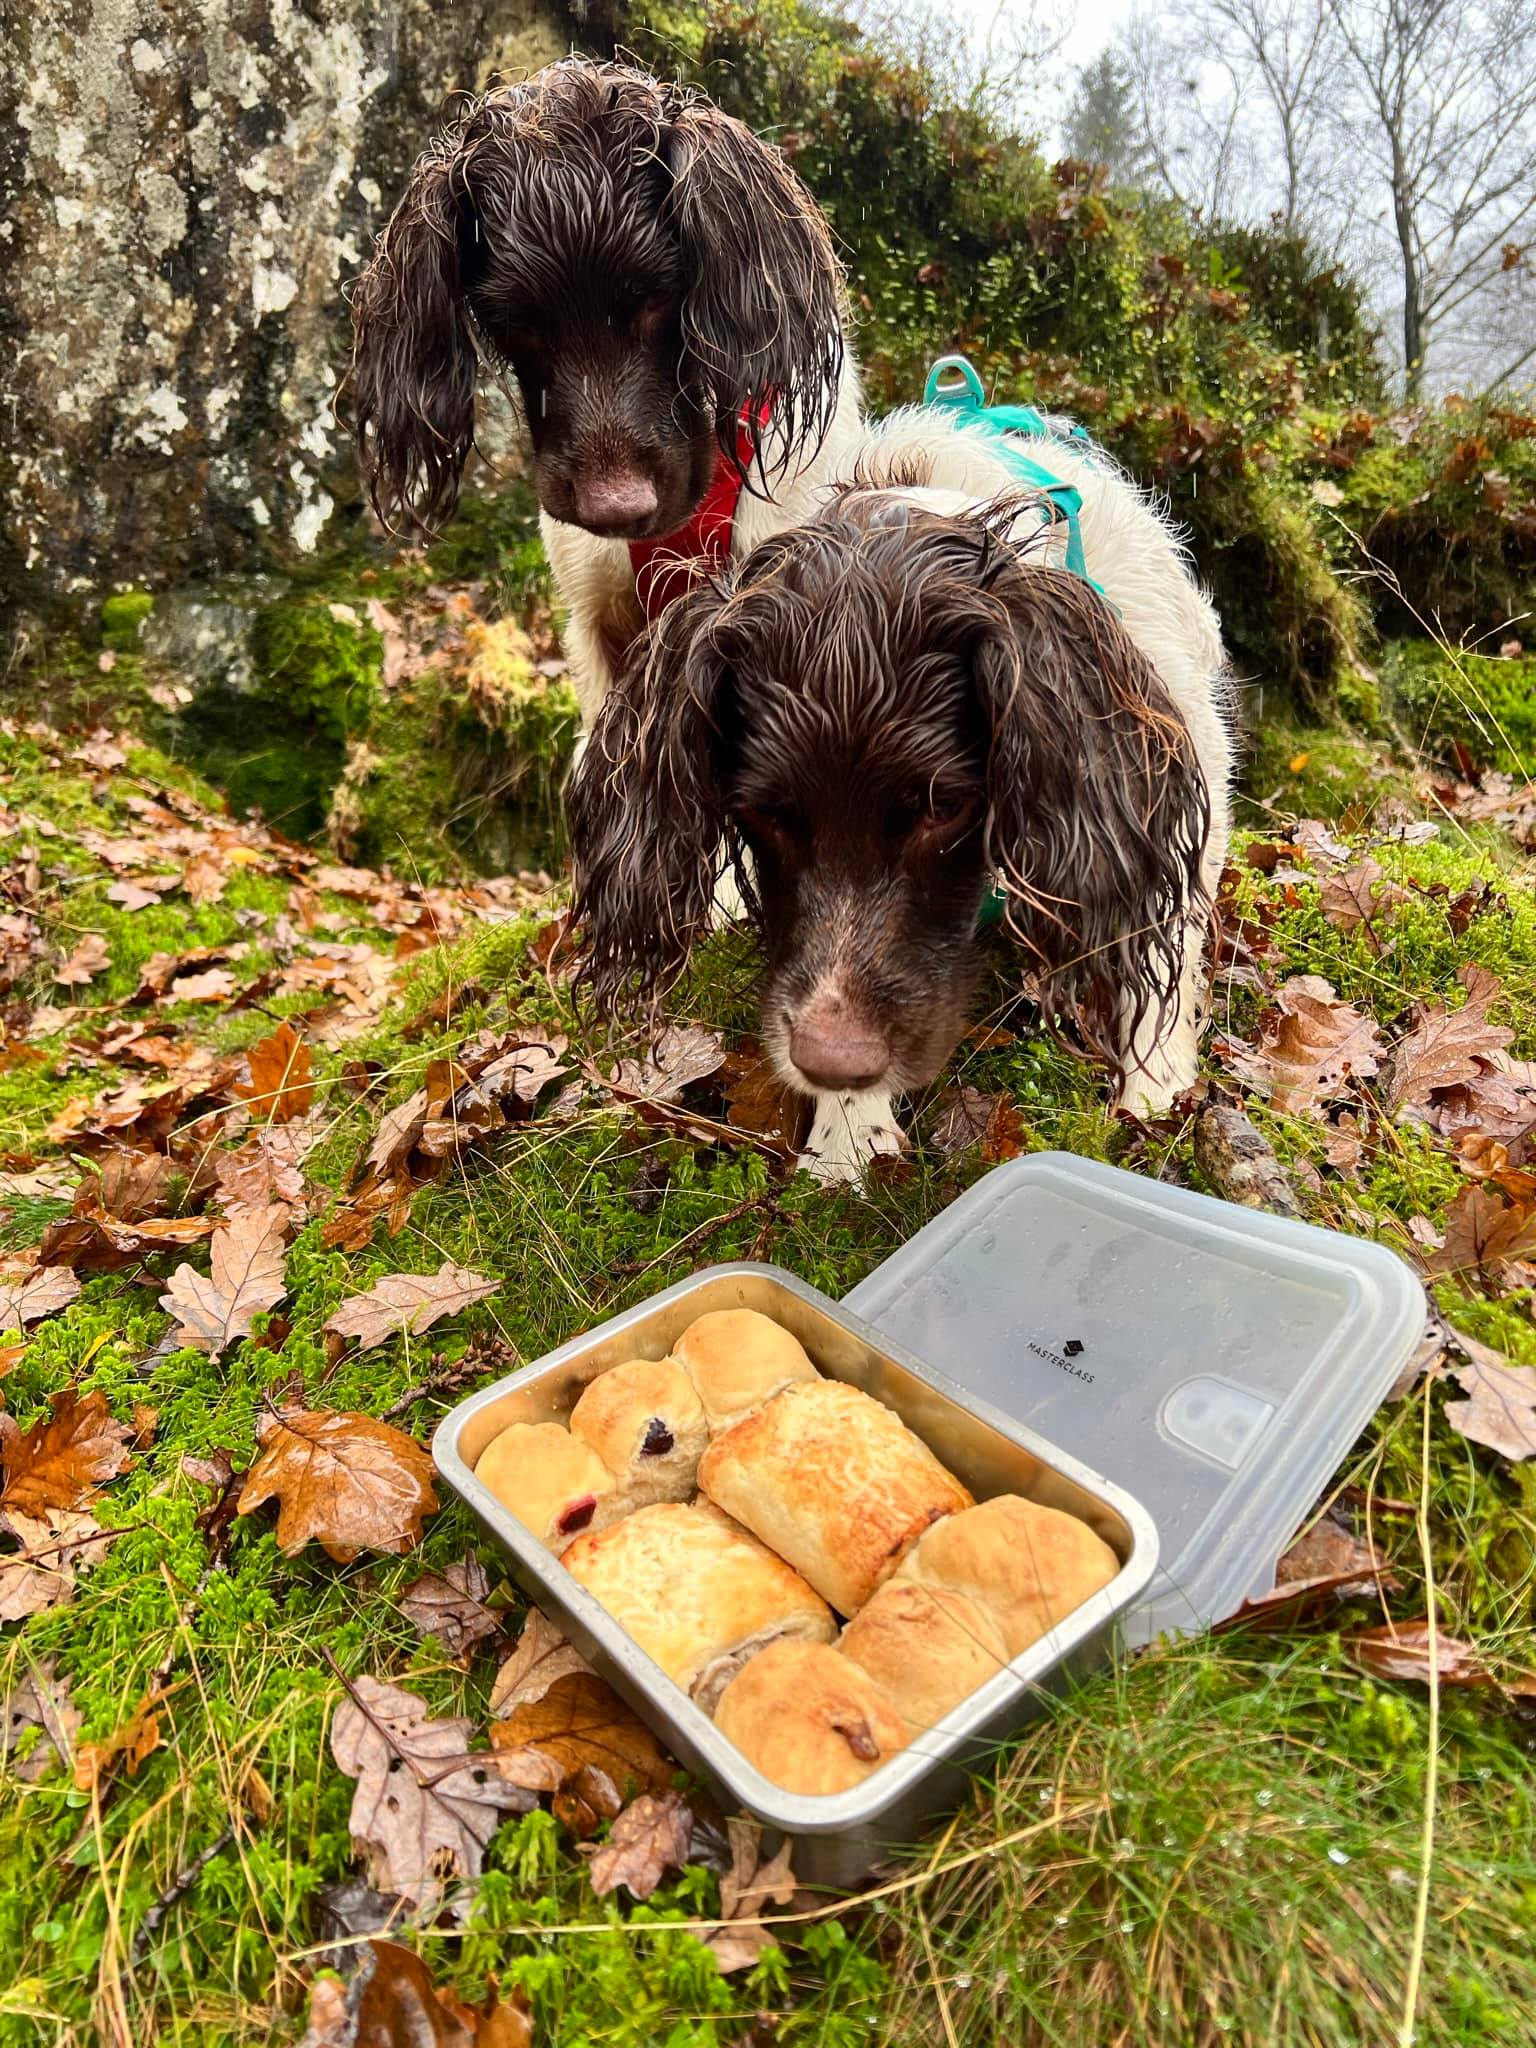 Dogs Harry and Paddy sniff a pastry that Kerry eats while on the trail. 